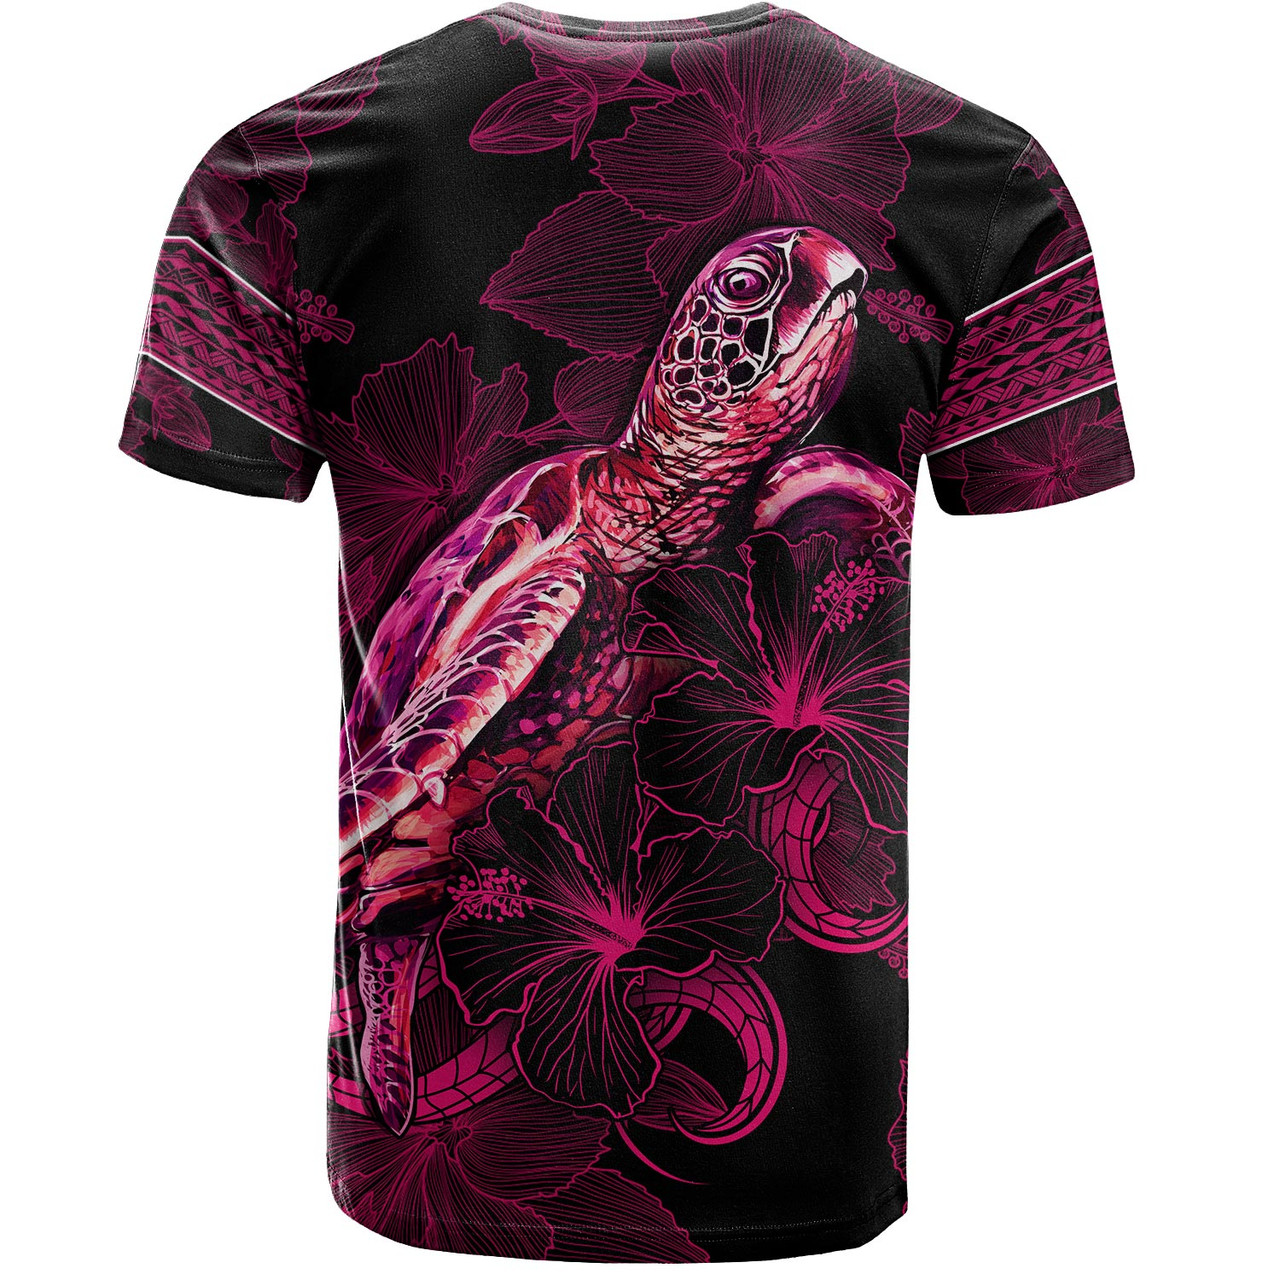 Papua New Guinea T-Shirt Sea Turtle With Blooming Hibiscus Flowers Tribal Maroon